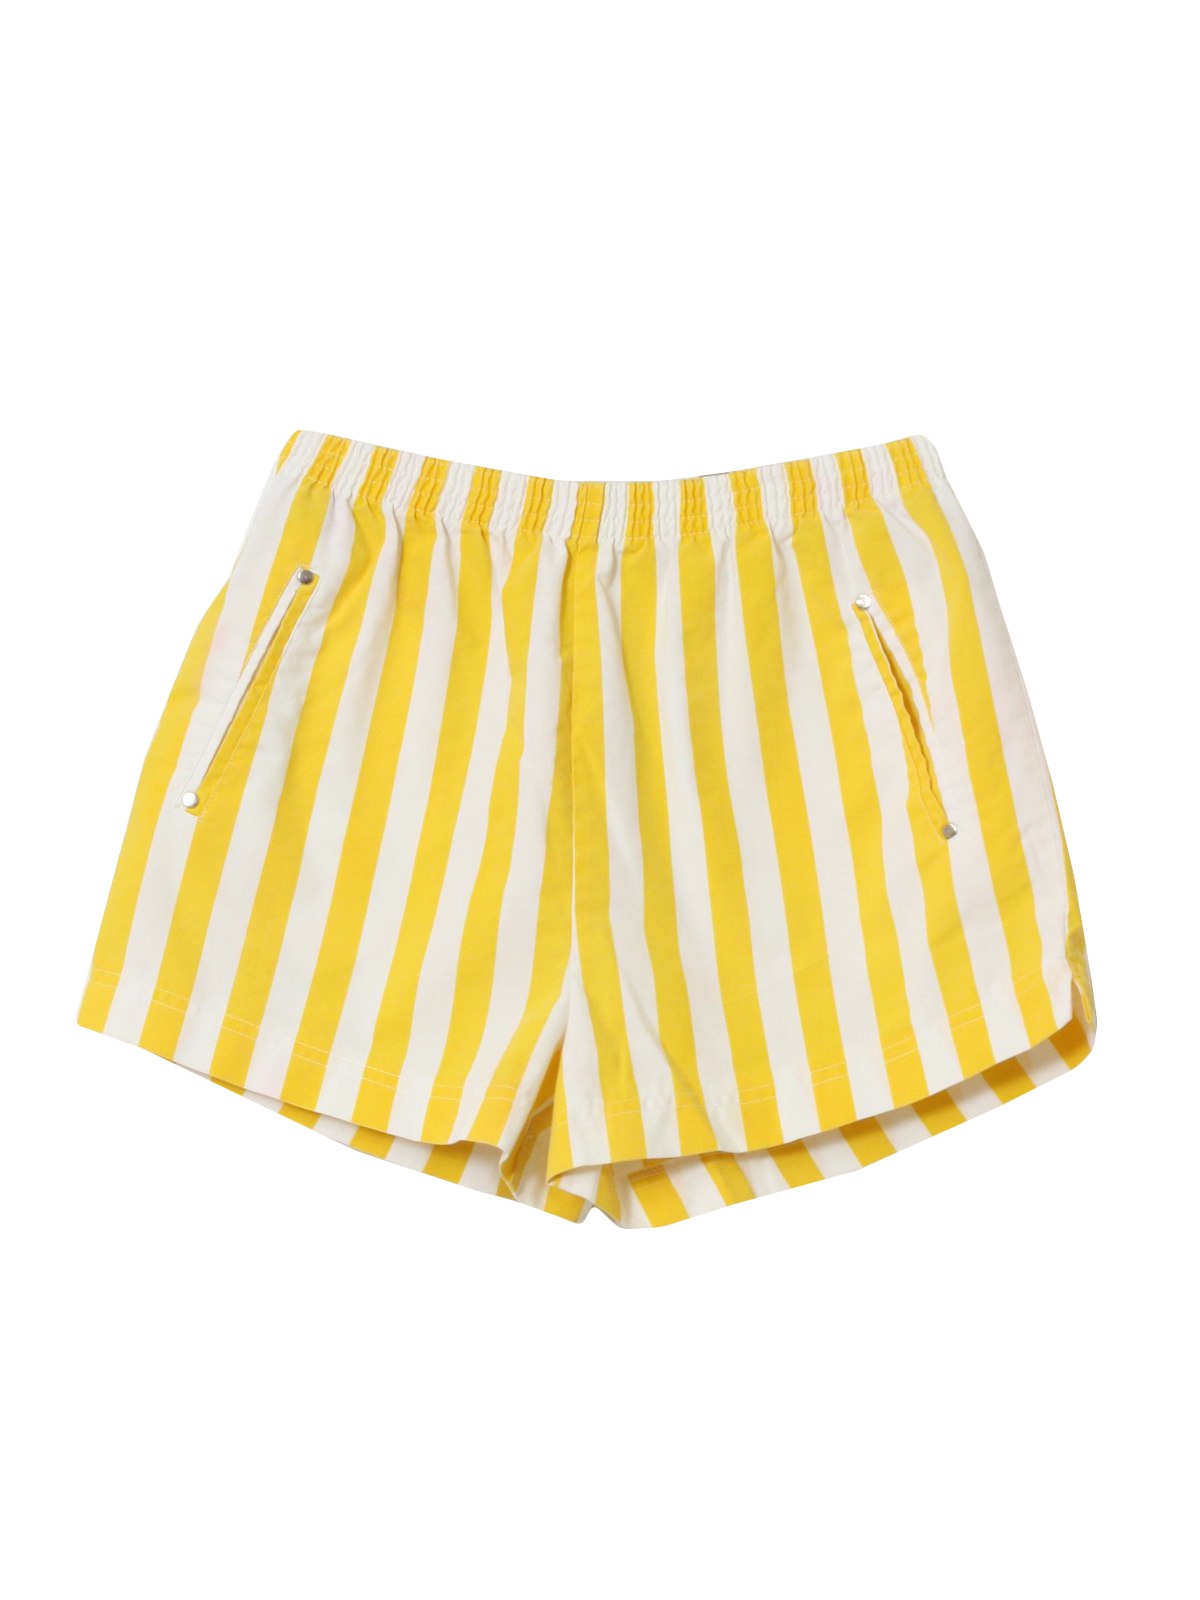 Vintage Justin Allen 1980s Shorts: 80s -Justin Allen- Womens yellow and ...